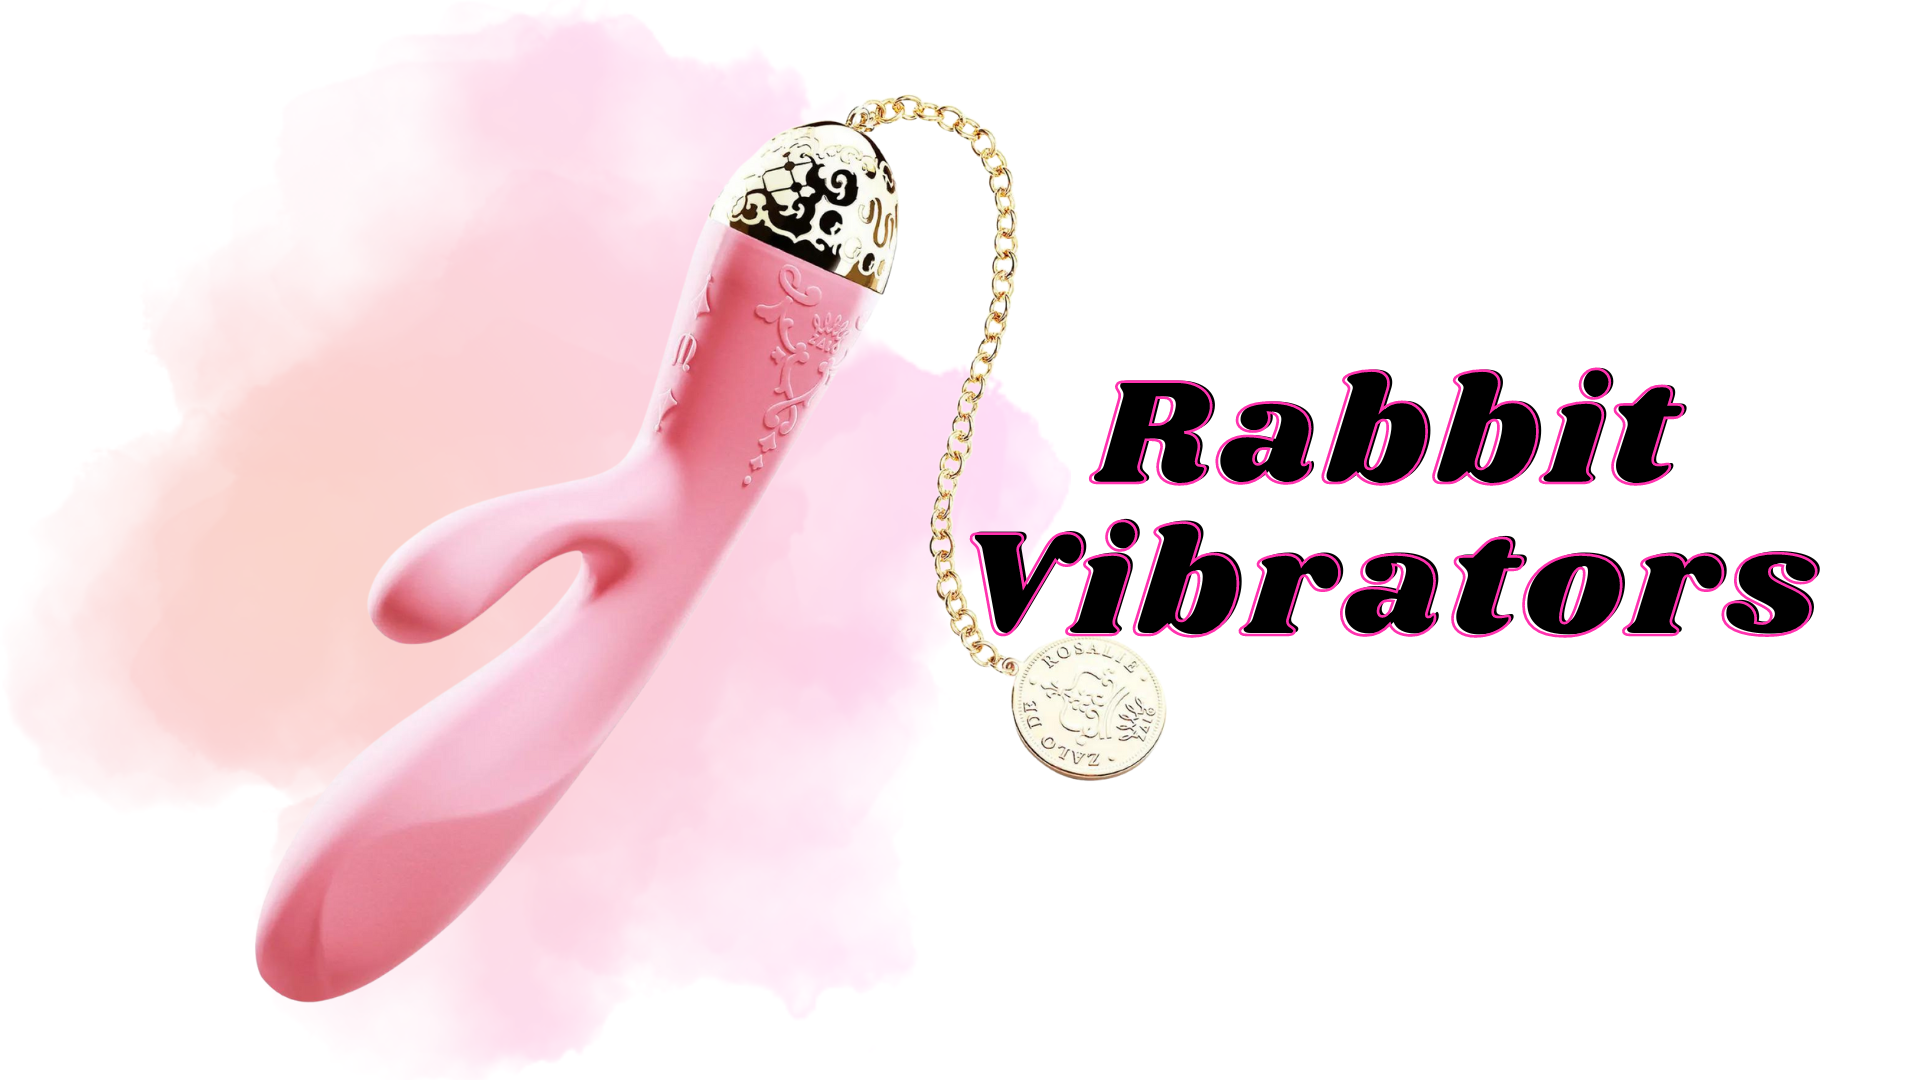 A pink Rabbit Vibrator with gold chain